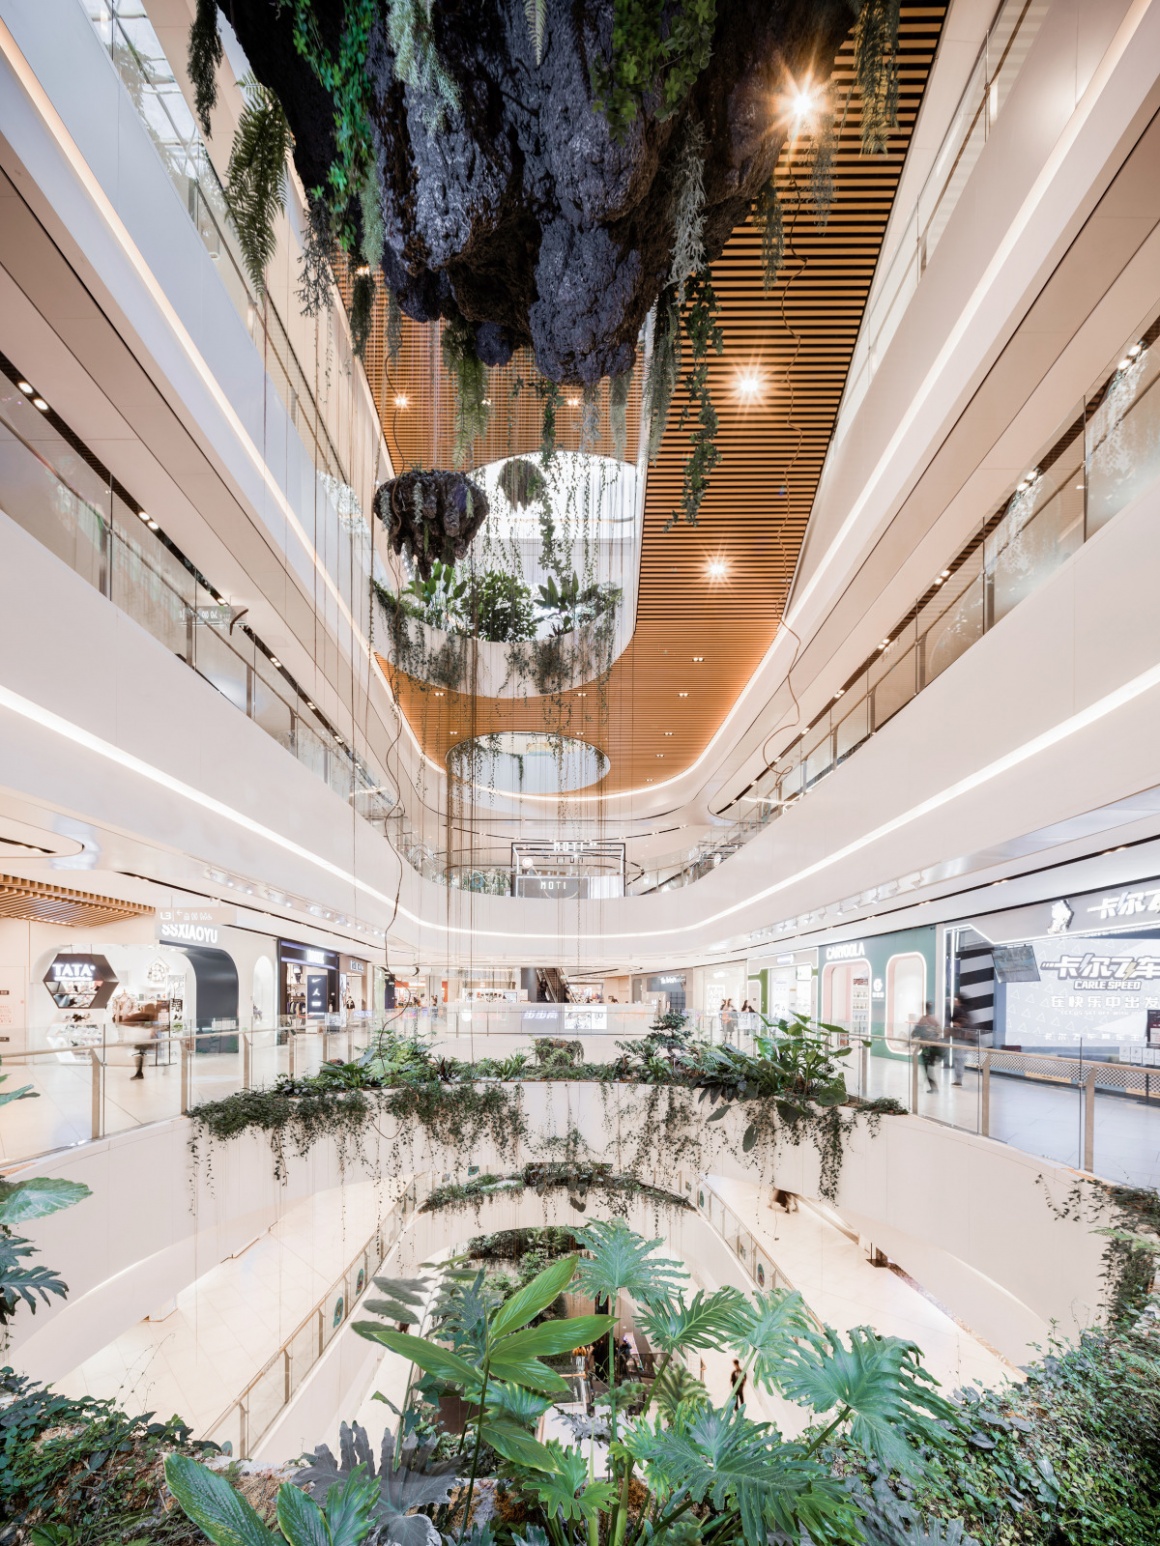 A shopping mall with several stories and hanging plants; copyright: Chill Shine...